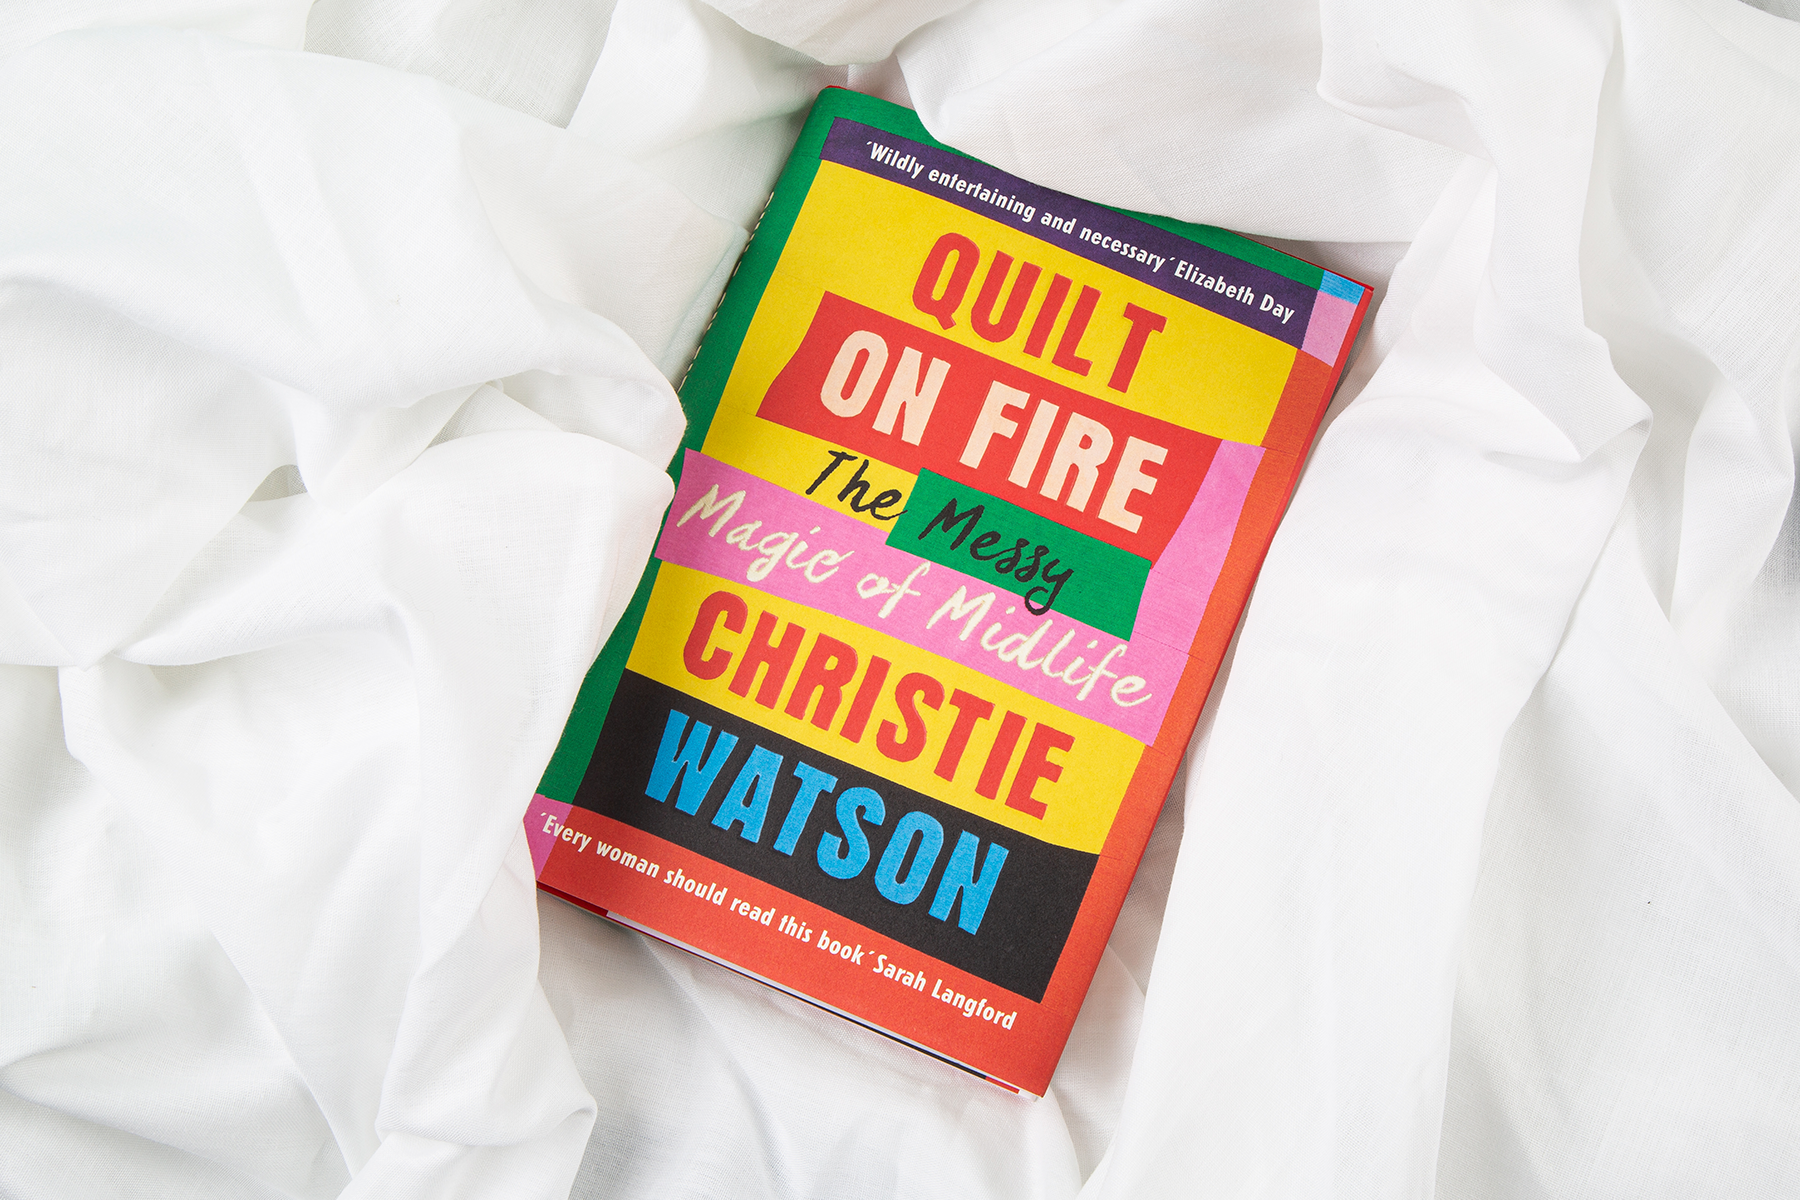 An image of Quilt on Fire on white bedsheets